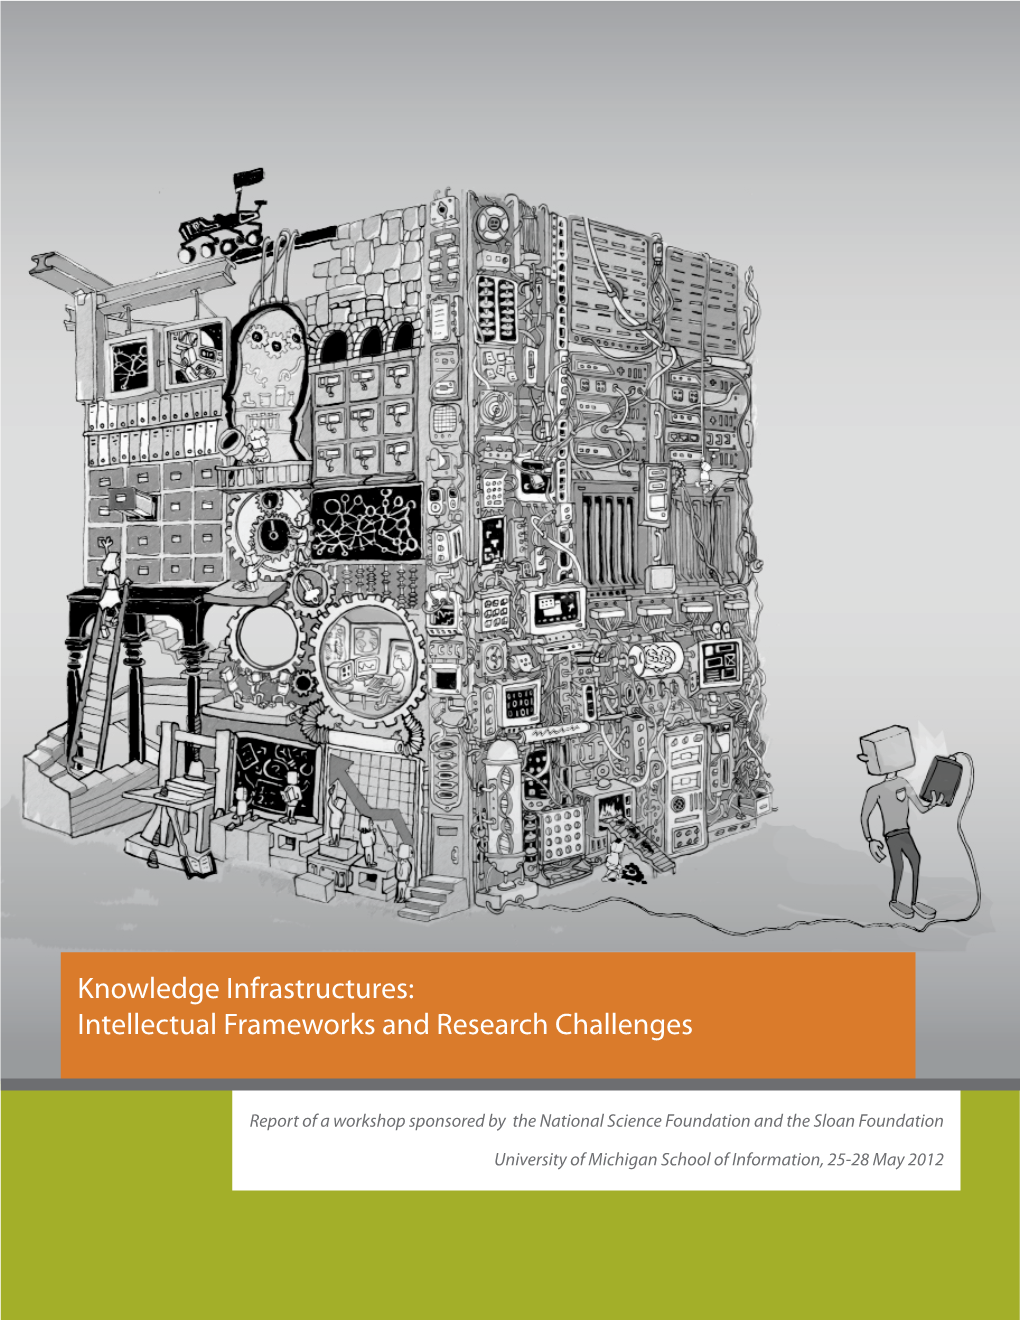 Knowledge Infrastructures: Intellectual Frameworks and Research Challenges